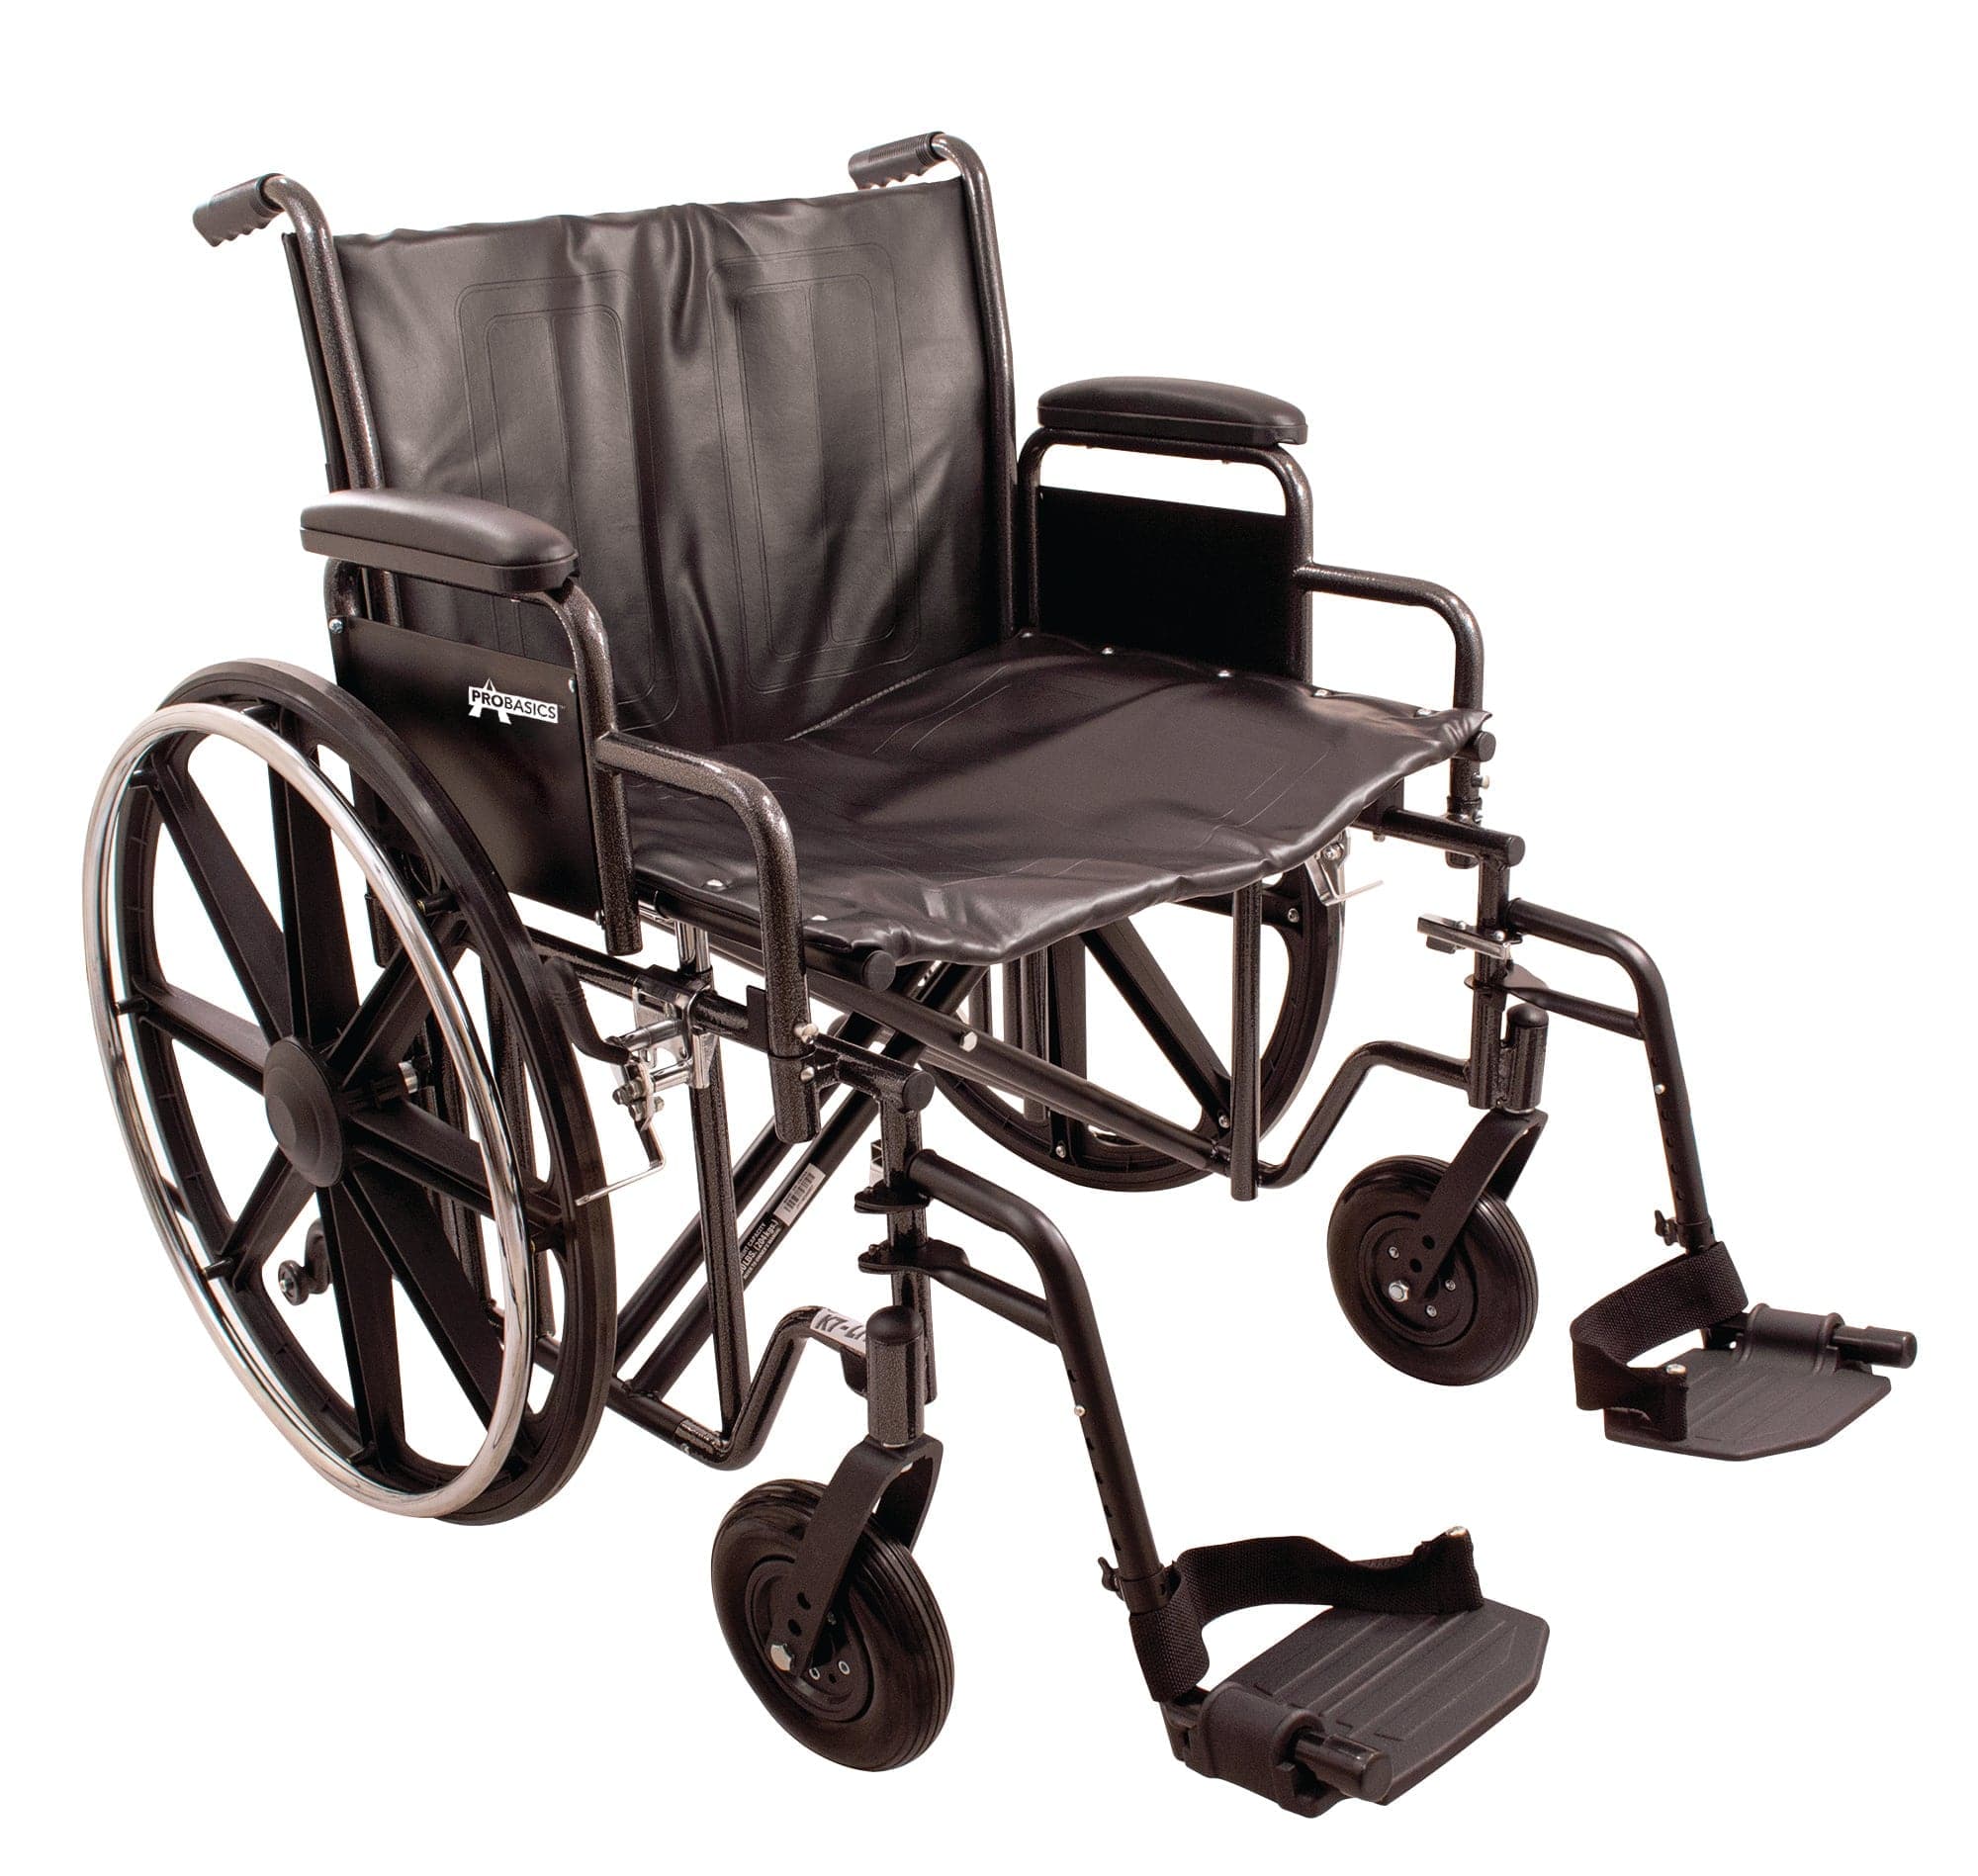 Compass Health K7 Wheelchairs Compass Health ProBasics Heavy Duty K0007 Wheelchair, 22" x 18" Seat with Footrests,